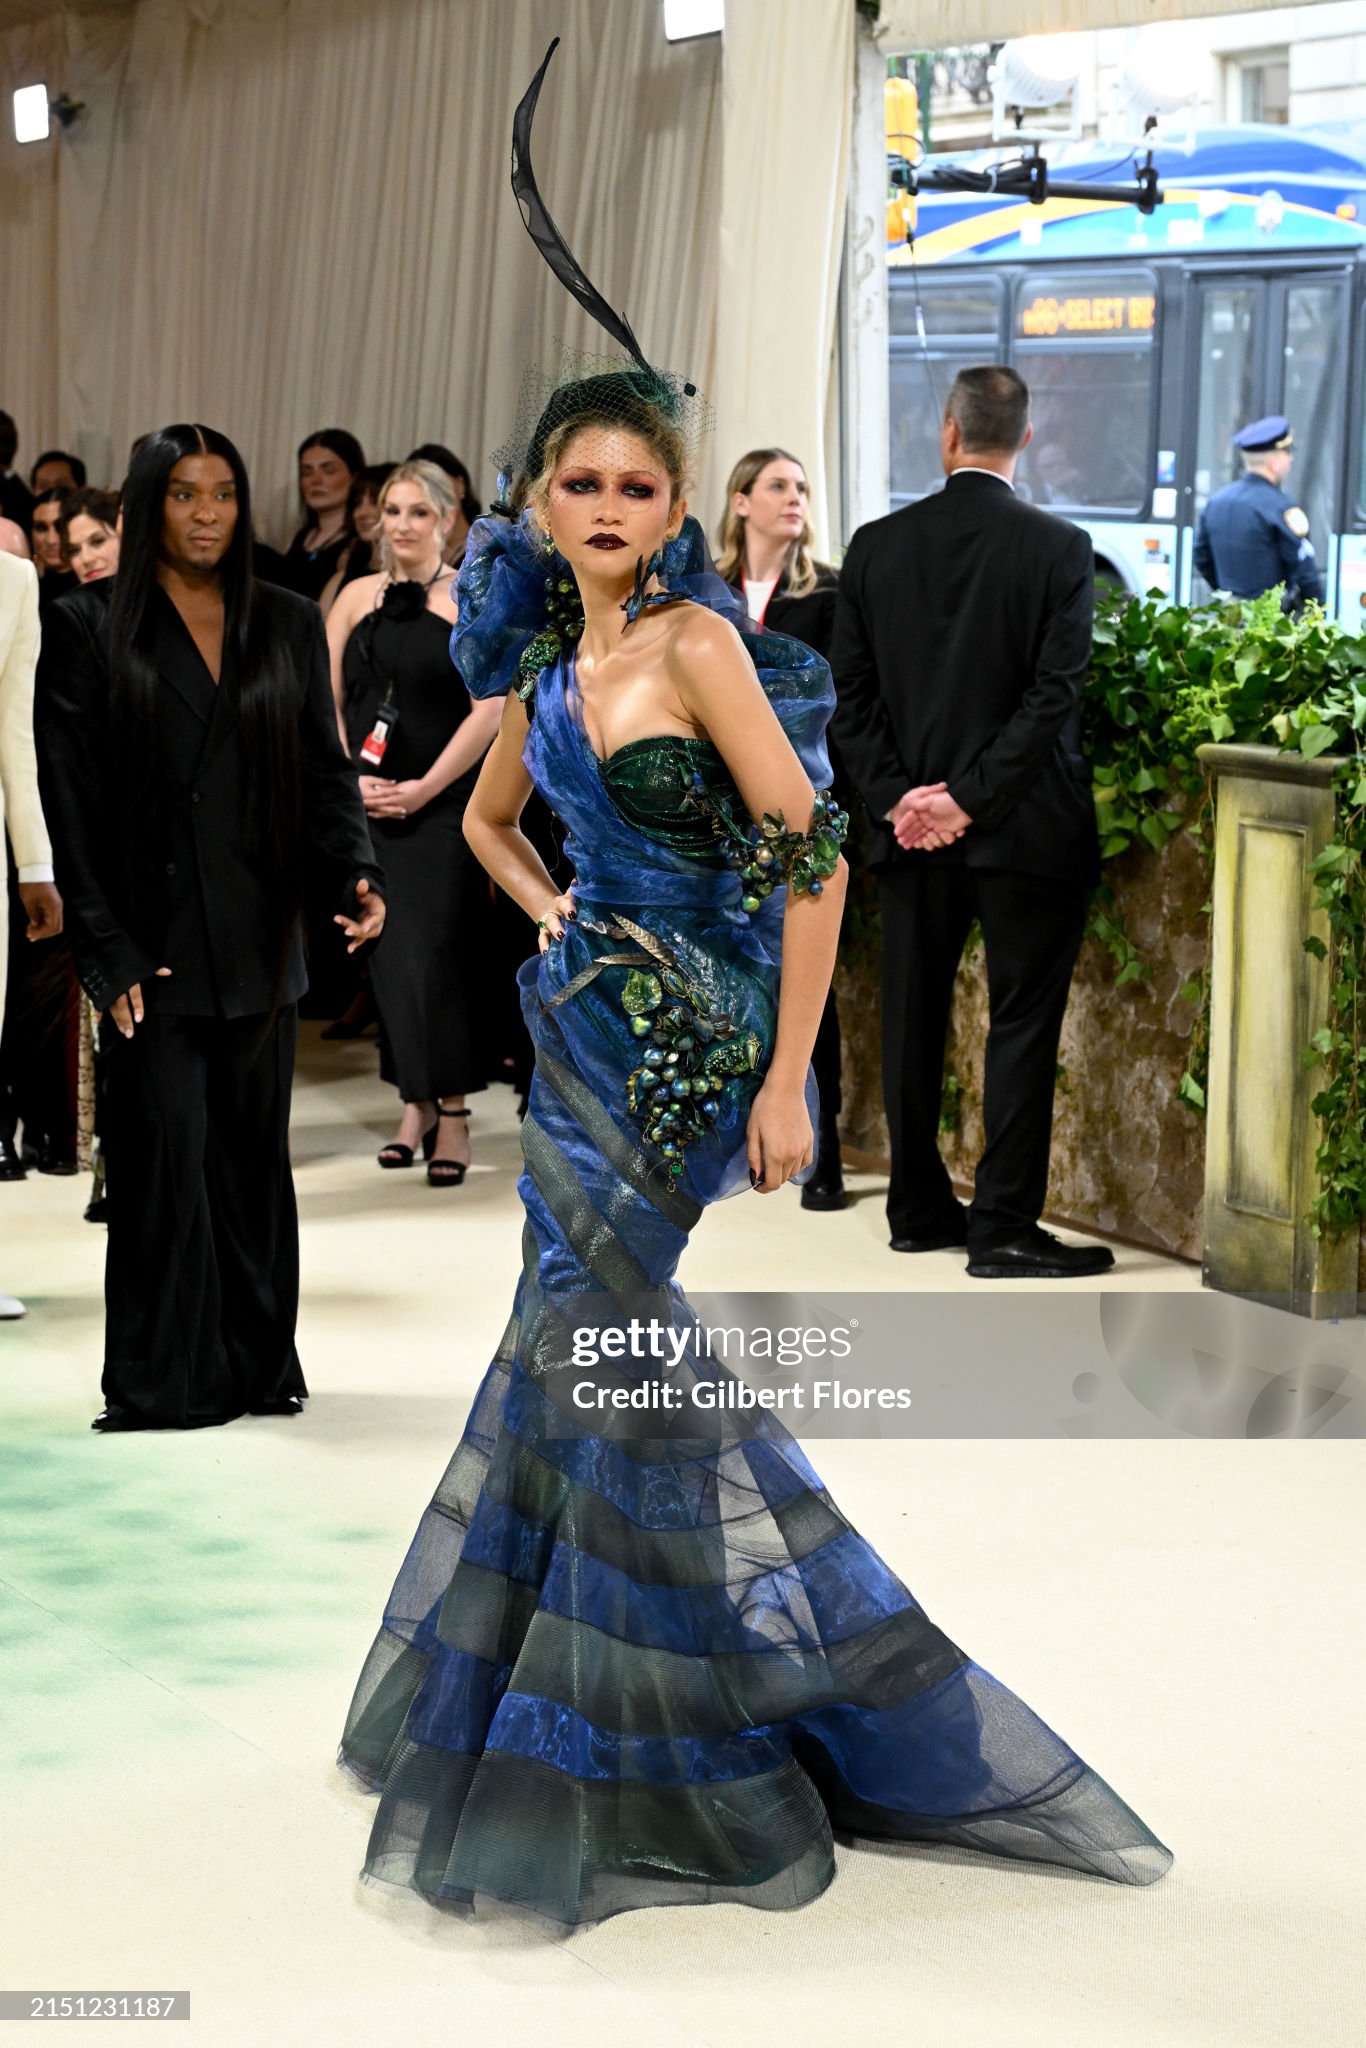 gettyimages-2151231187-2048x2048.jpg